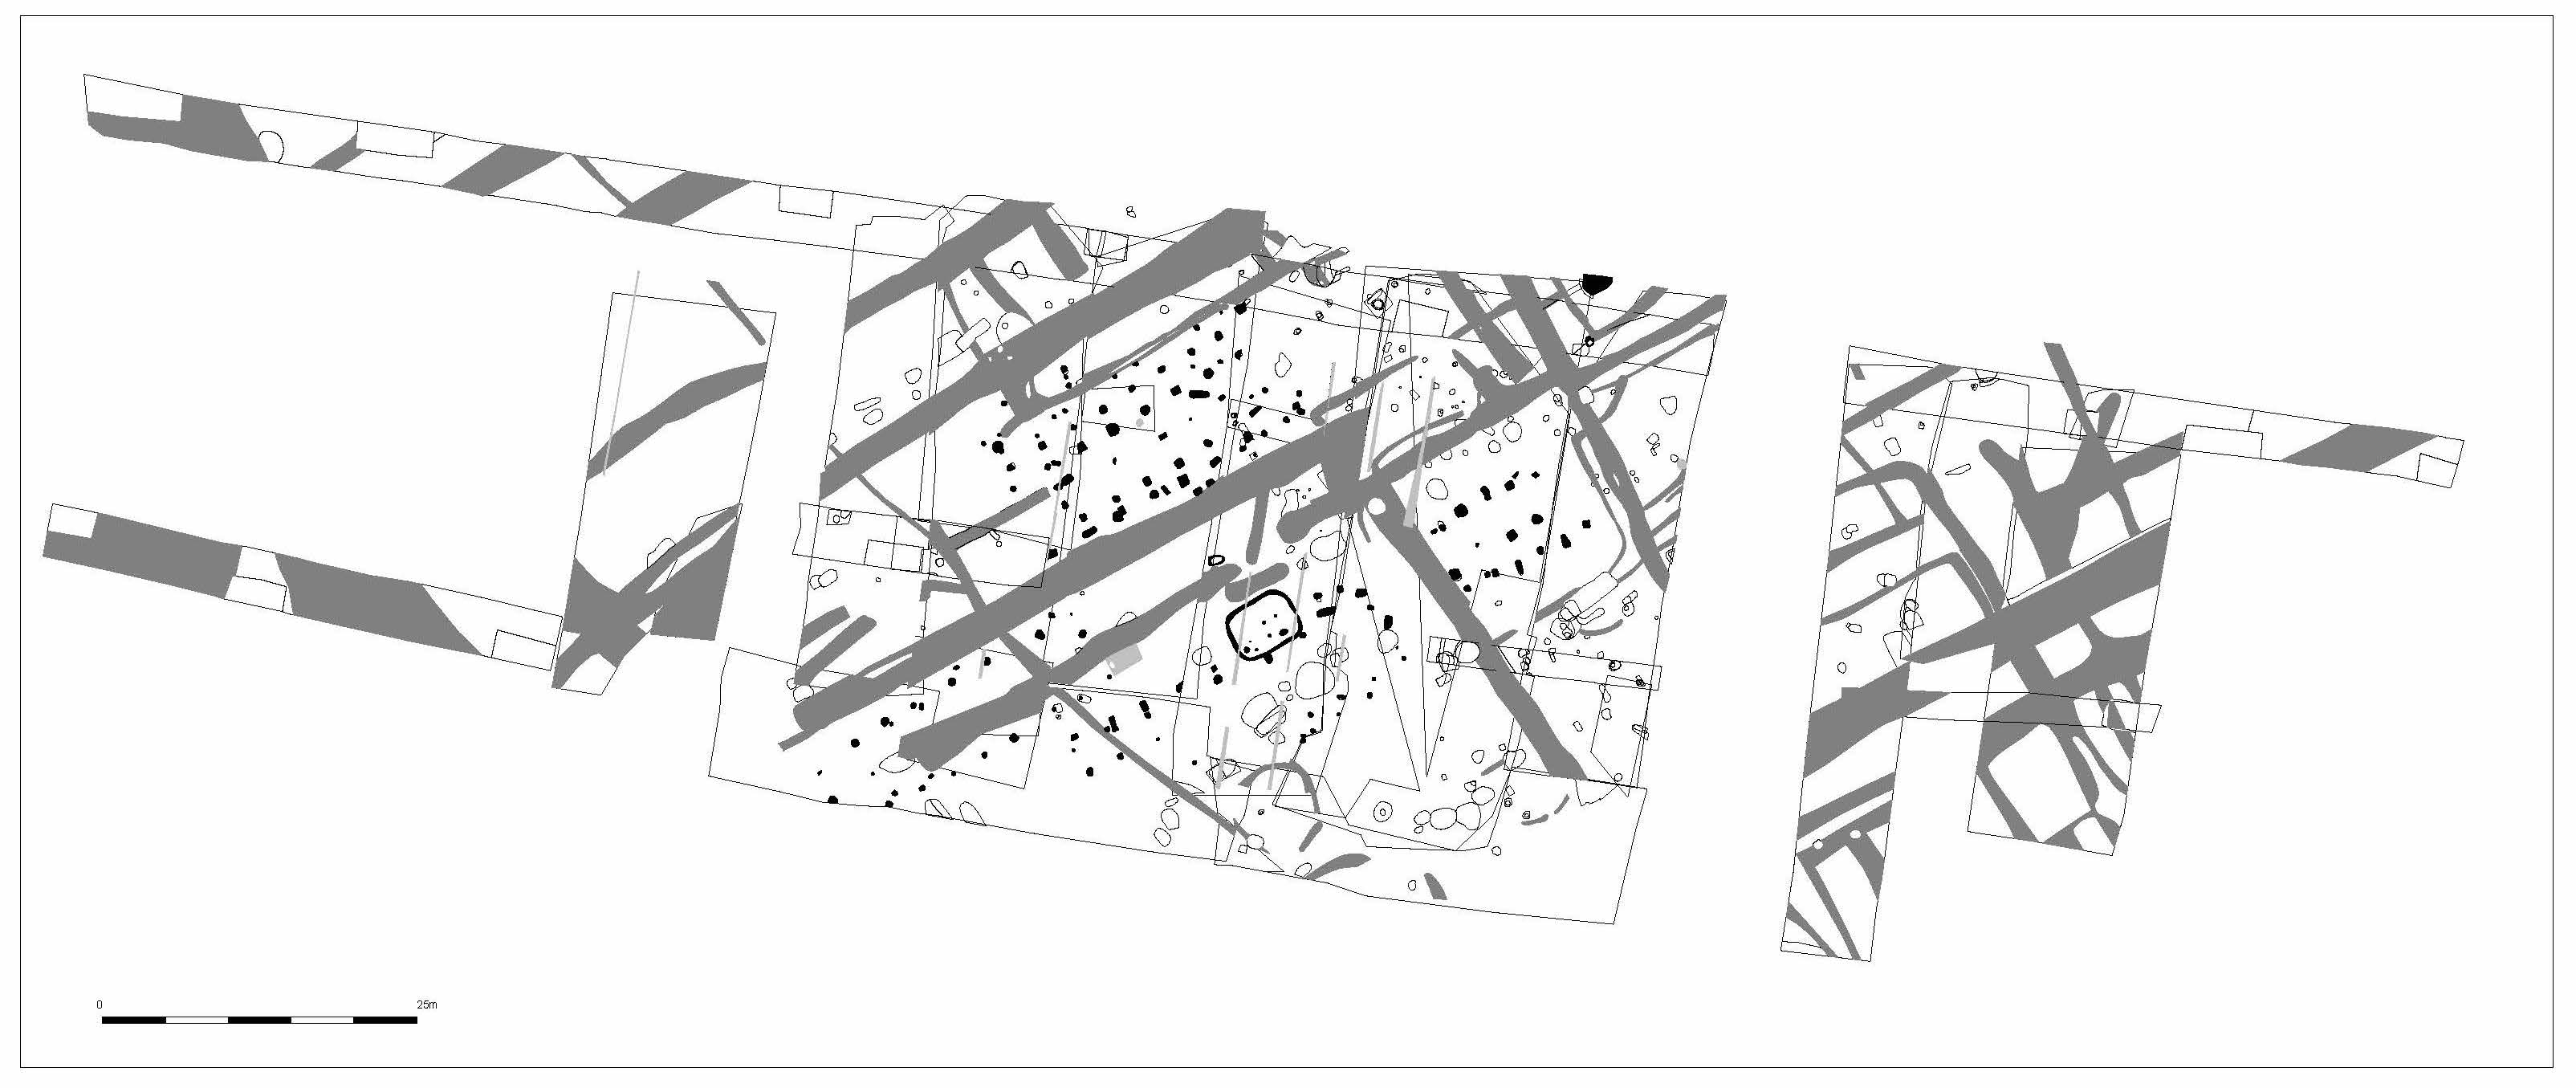 Map of the area created during the excavation process. Students get access to the file so they can inspect the structure of the area in more detail after the experience.